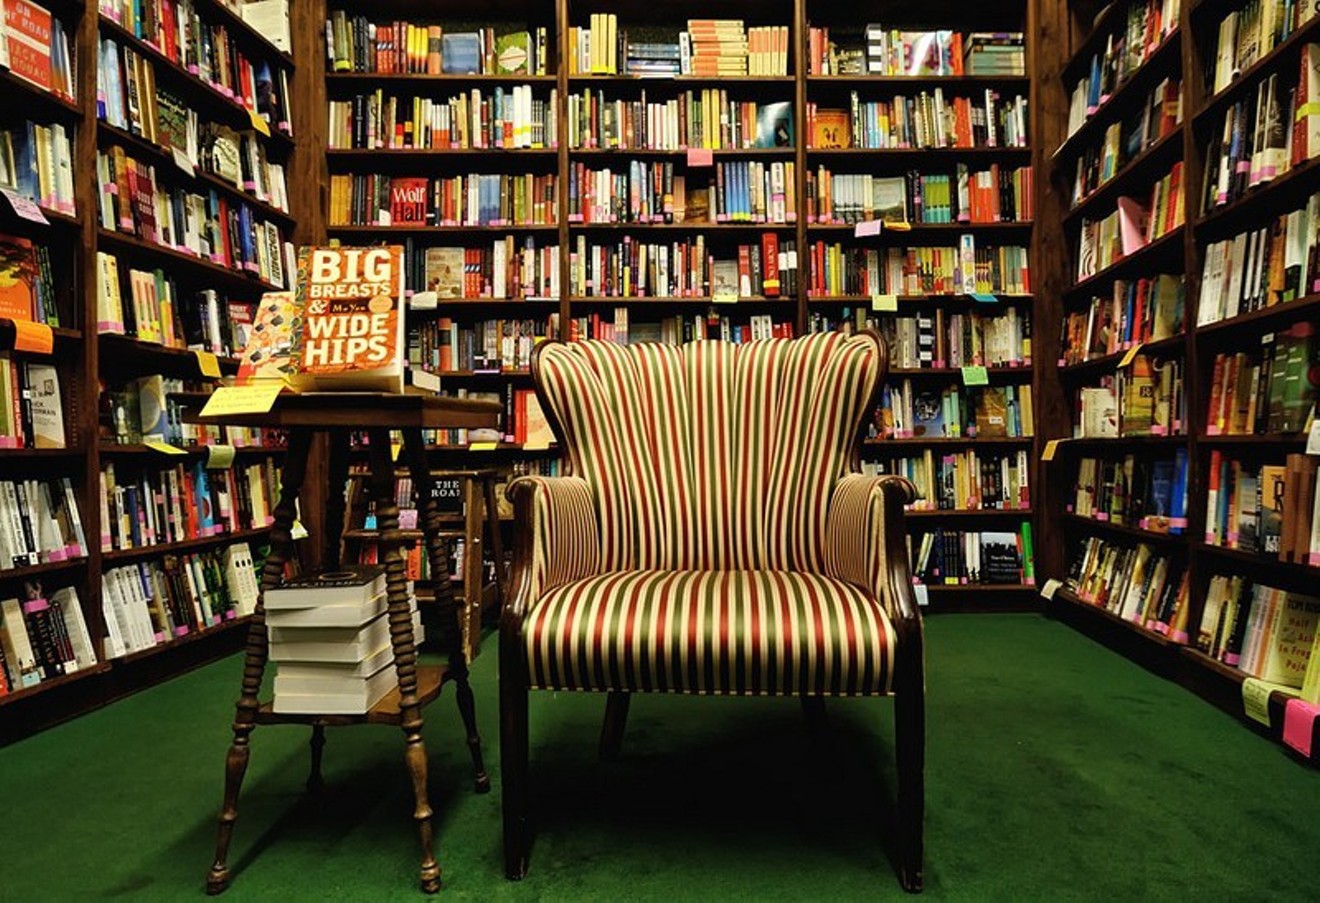 New owners are taking over the Tattered Cover.